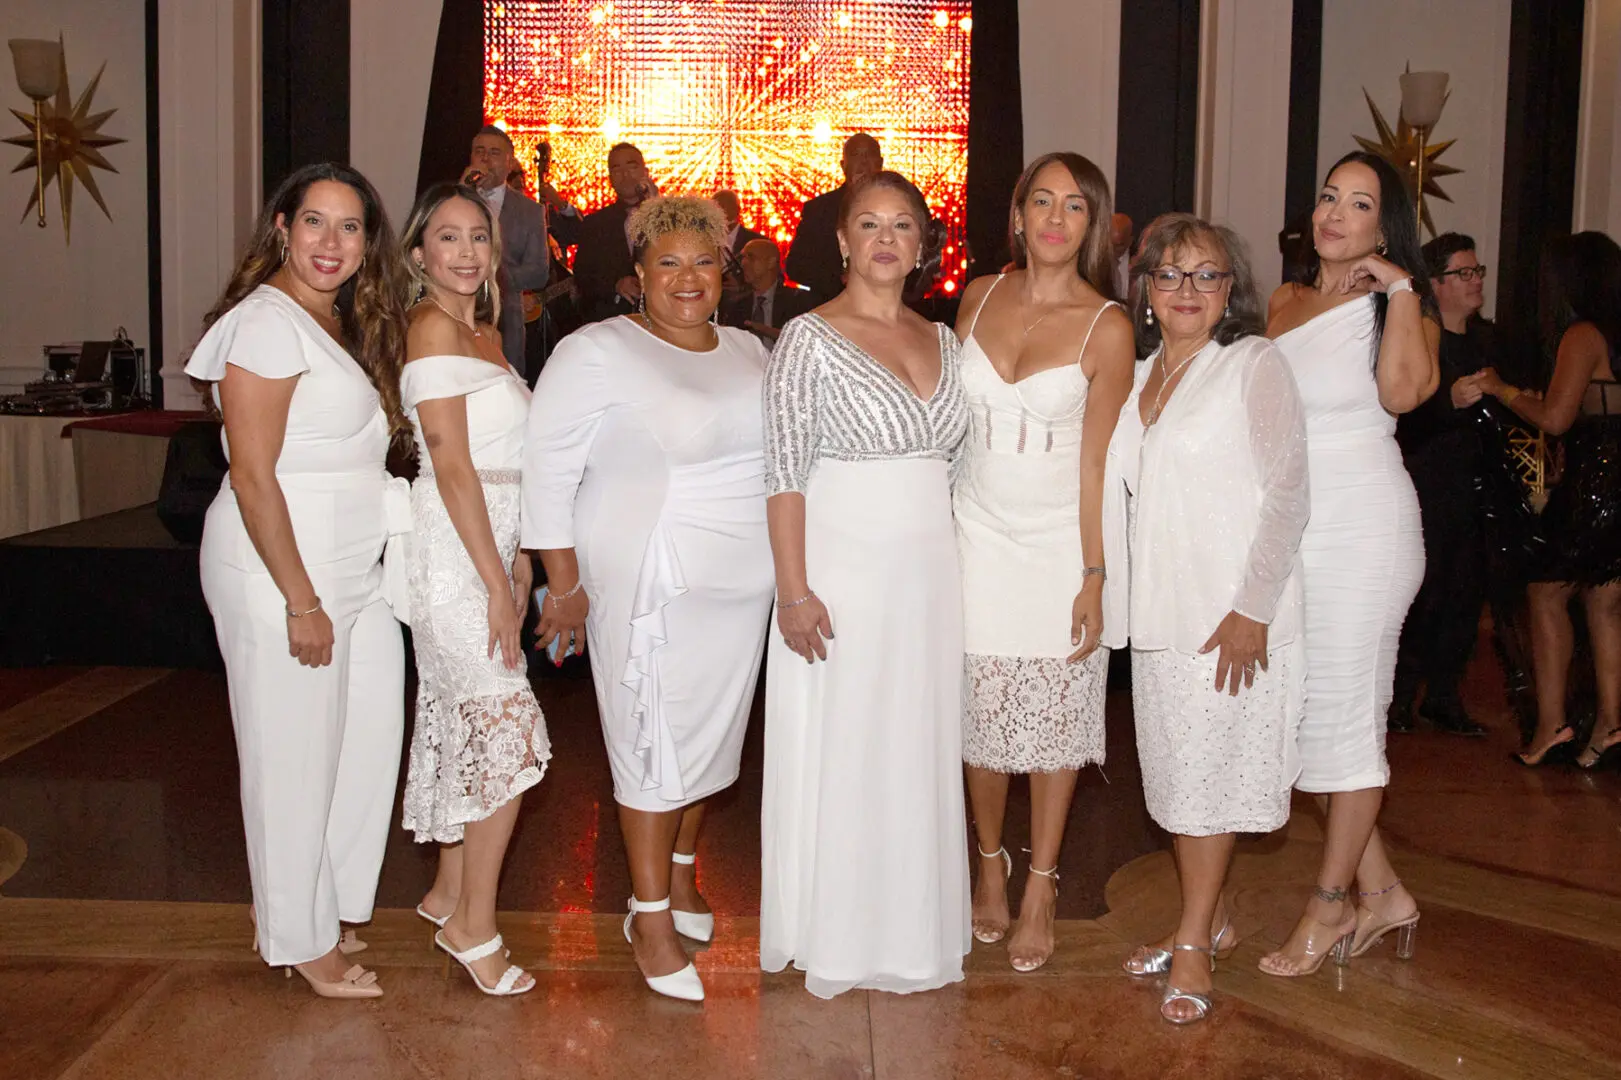 A group of women wearing white dress at an event